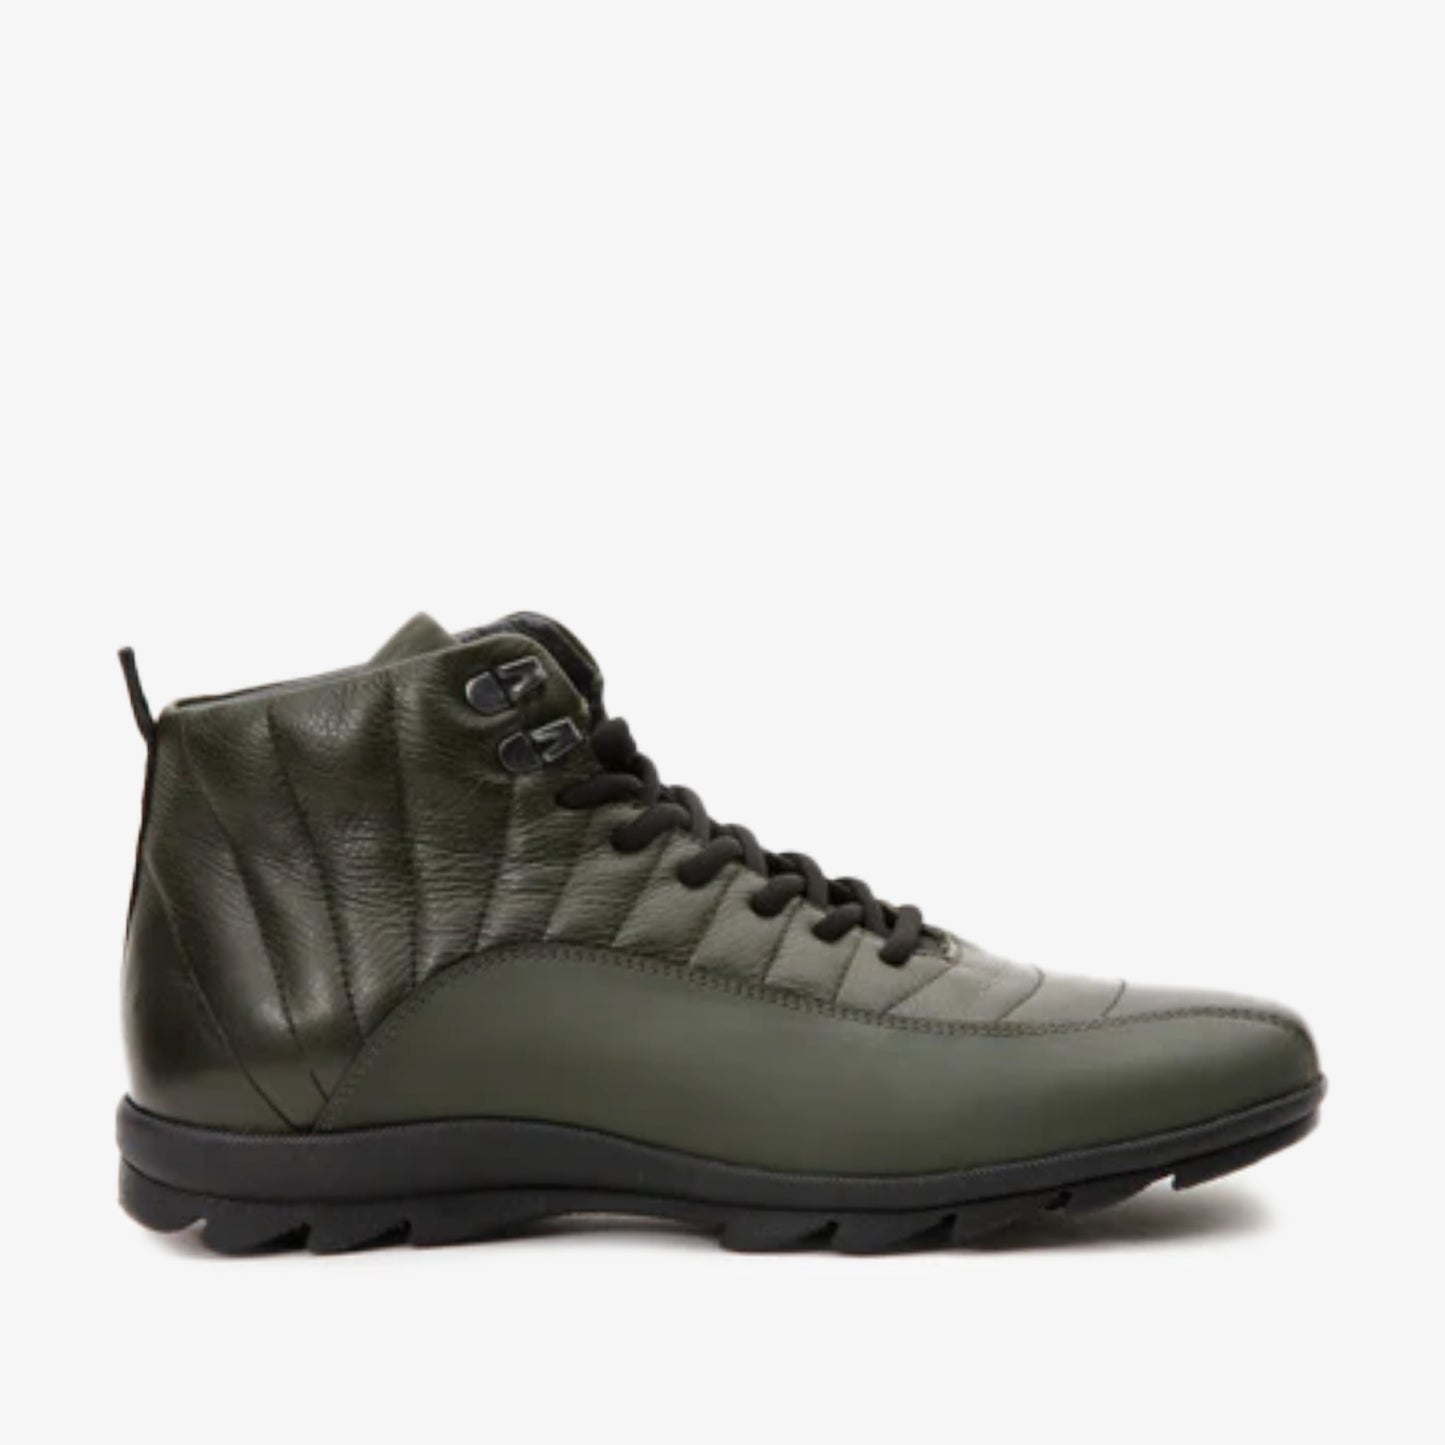 The Merter Green Leather Casual Lace-Up Men Boot